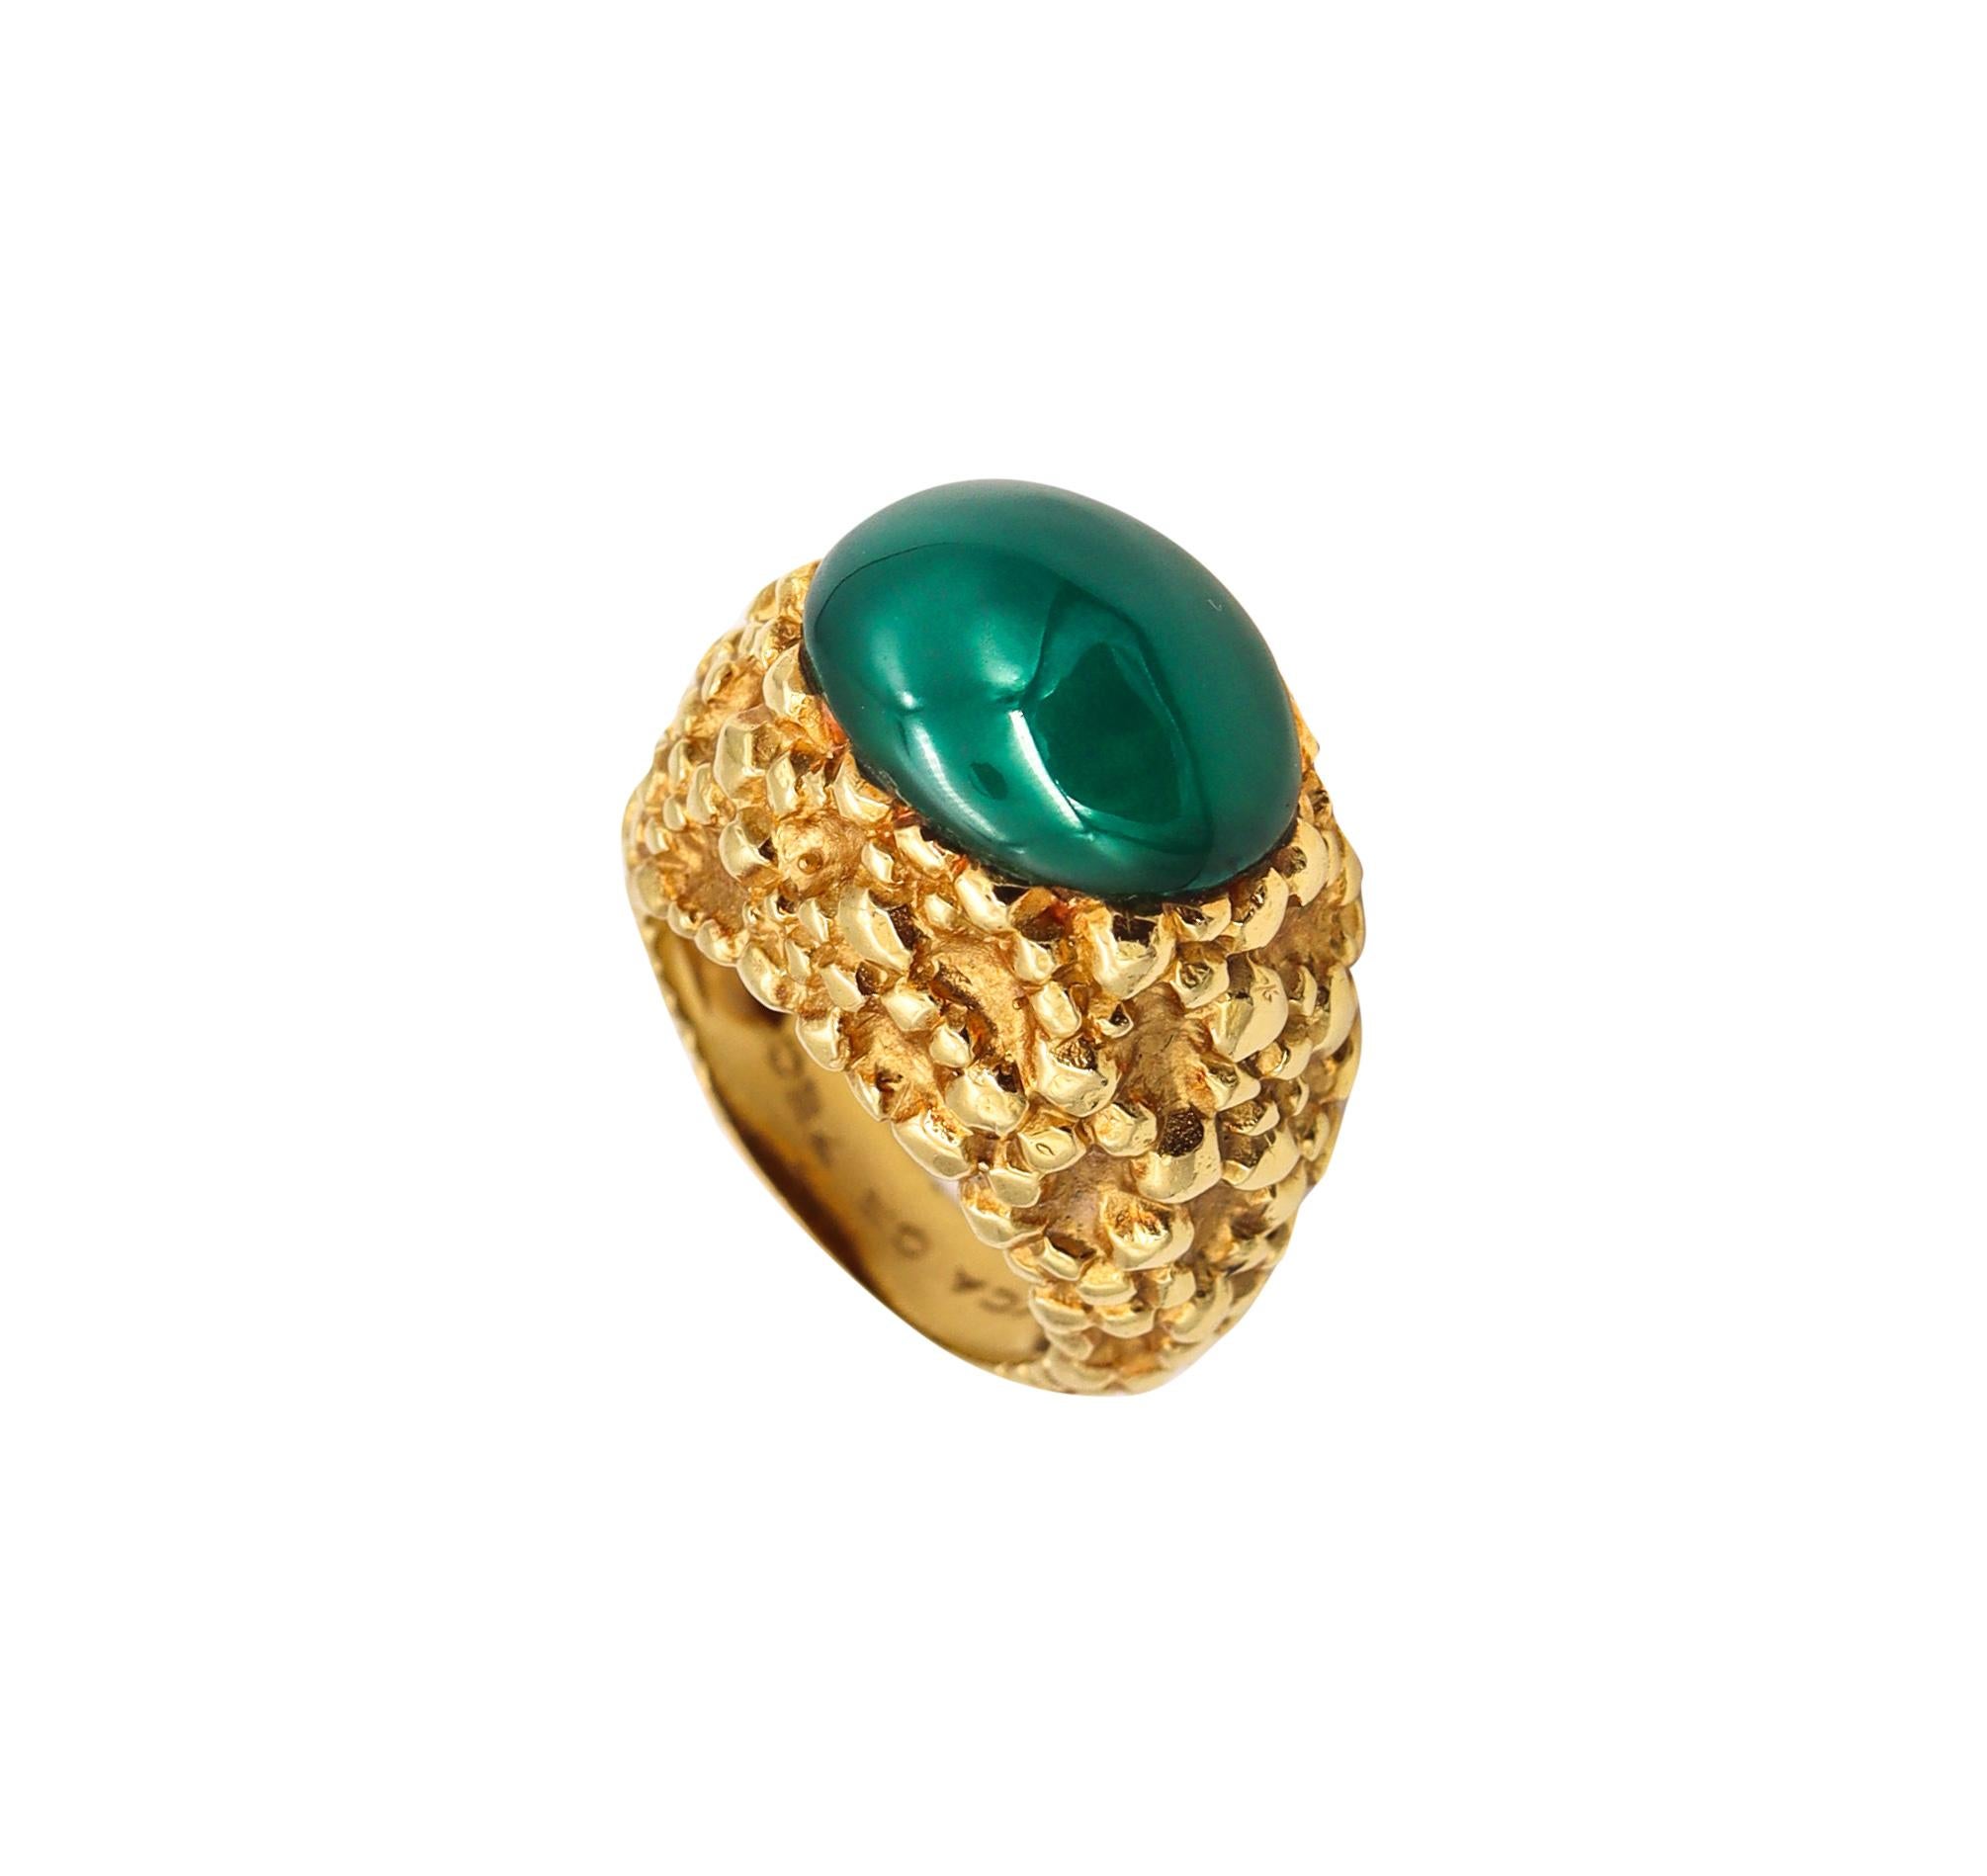 Van Cleef & Arpels 1970 Paris Cocktail Ring 18kt Gold with 8.27 Cts Chrysoprase 2